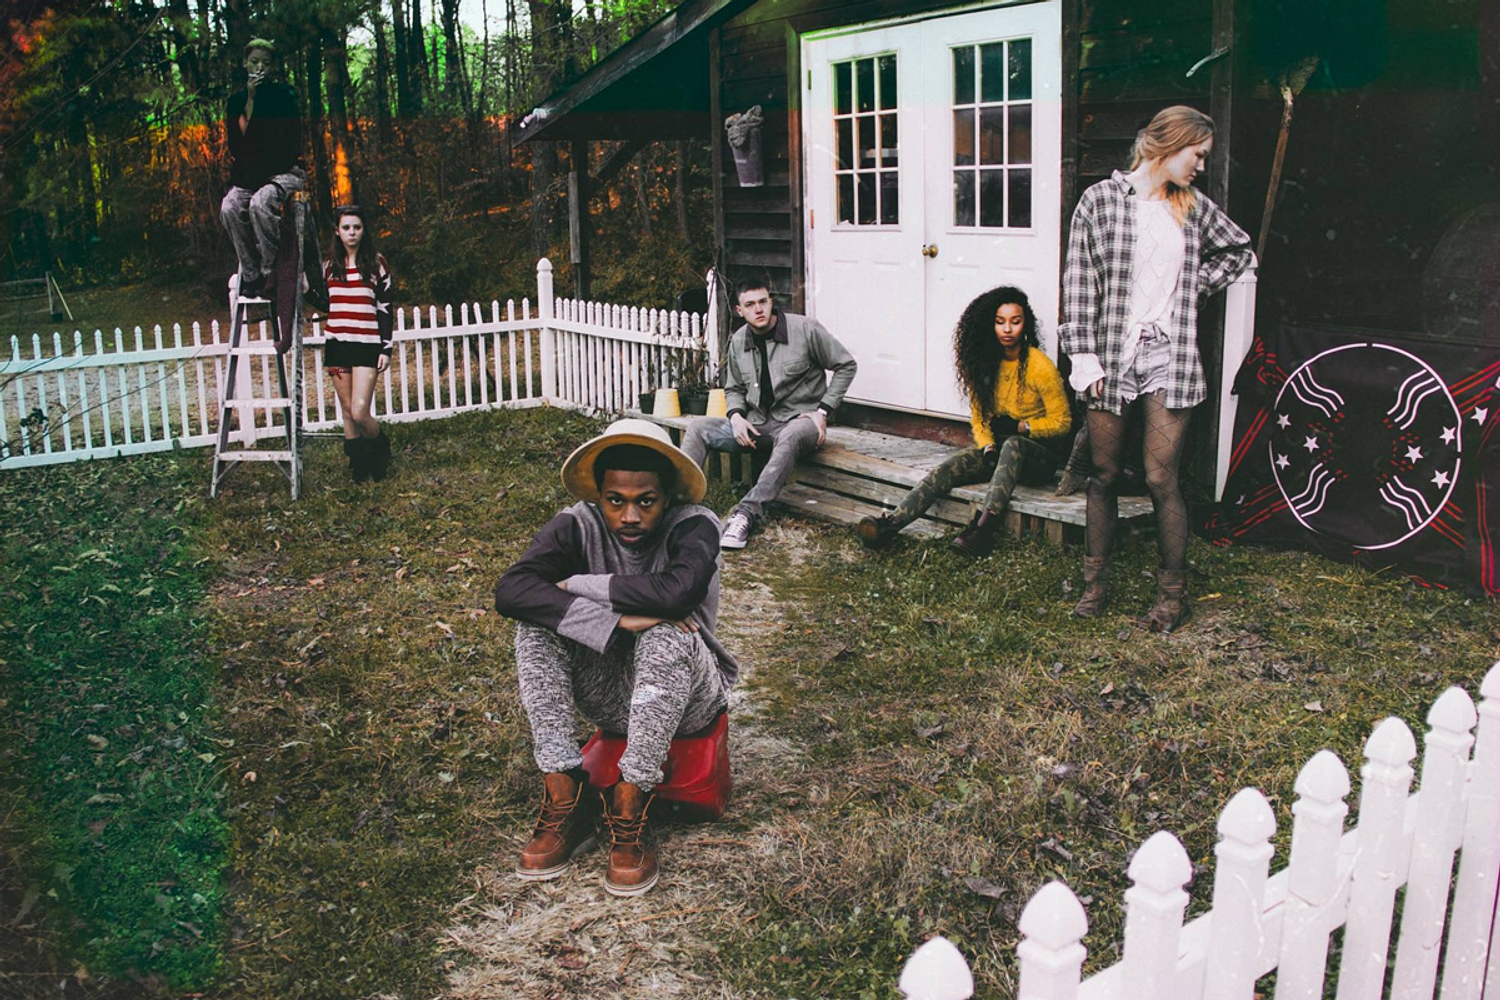 Watch footage from Raury’s first ever New York show